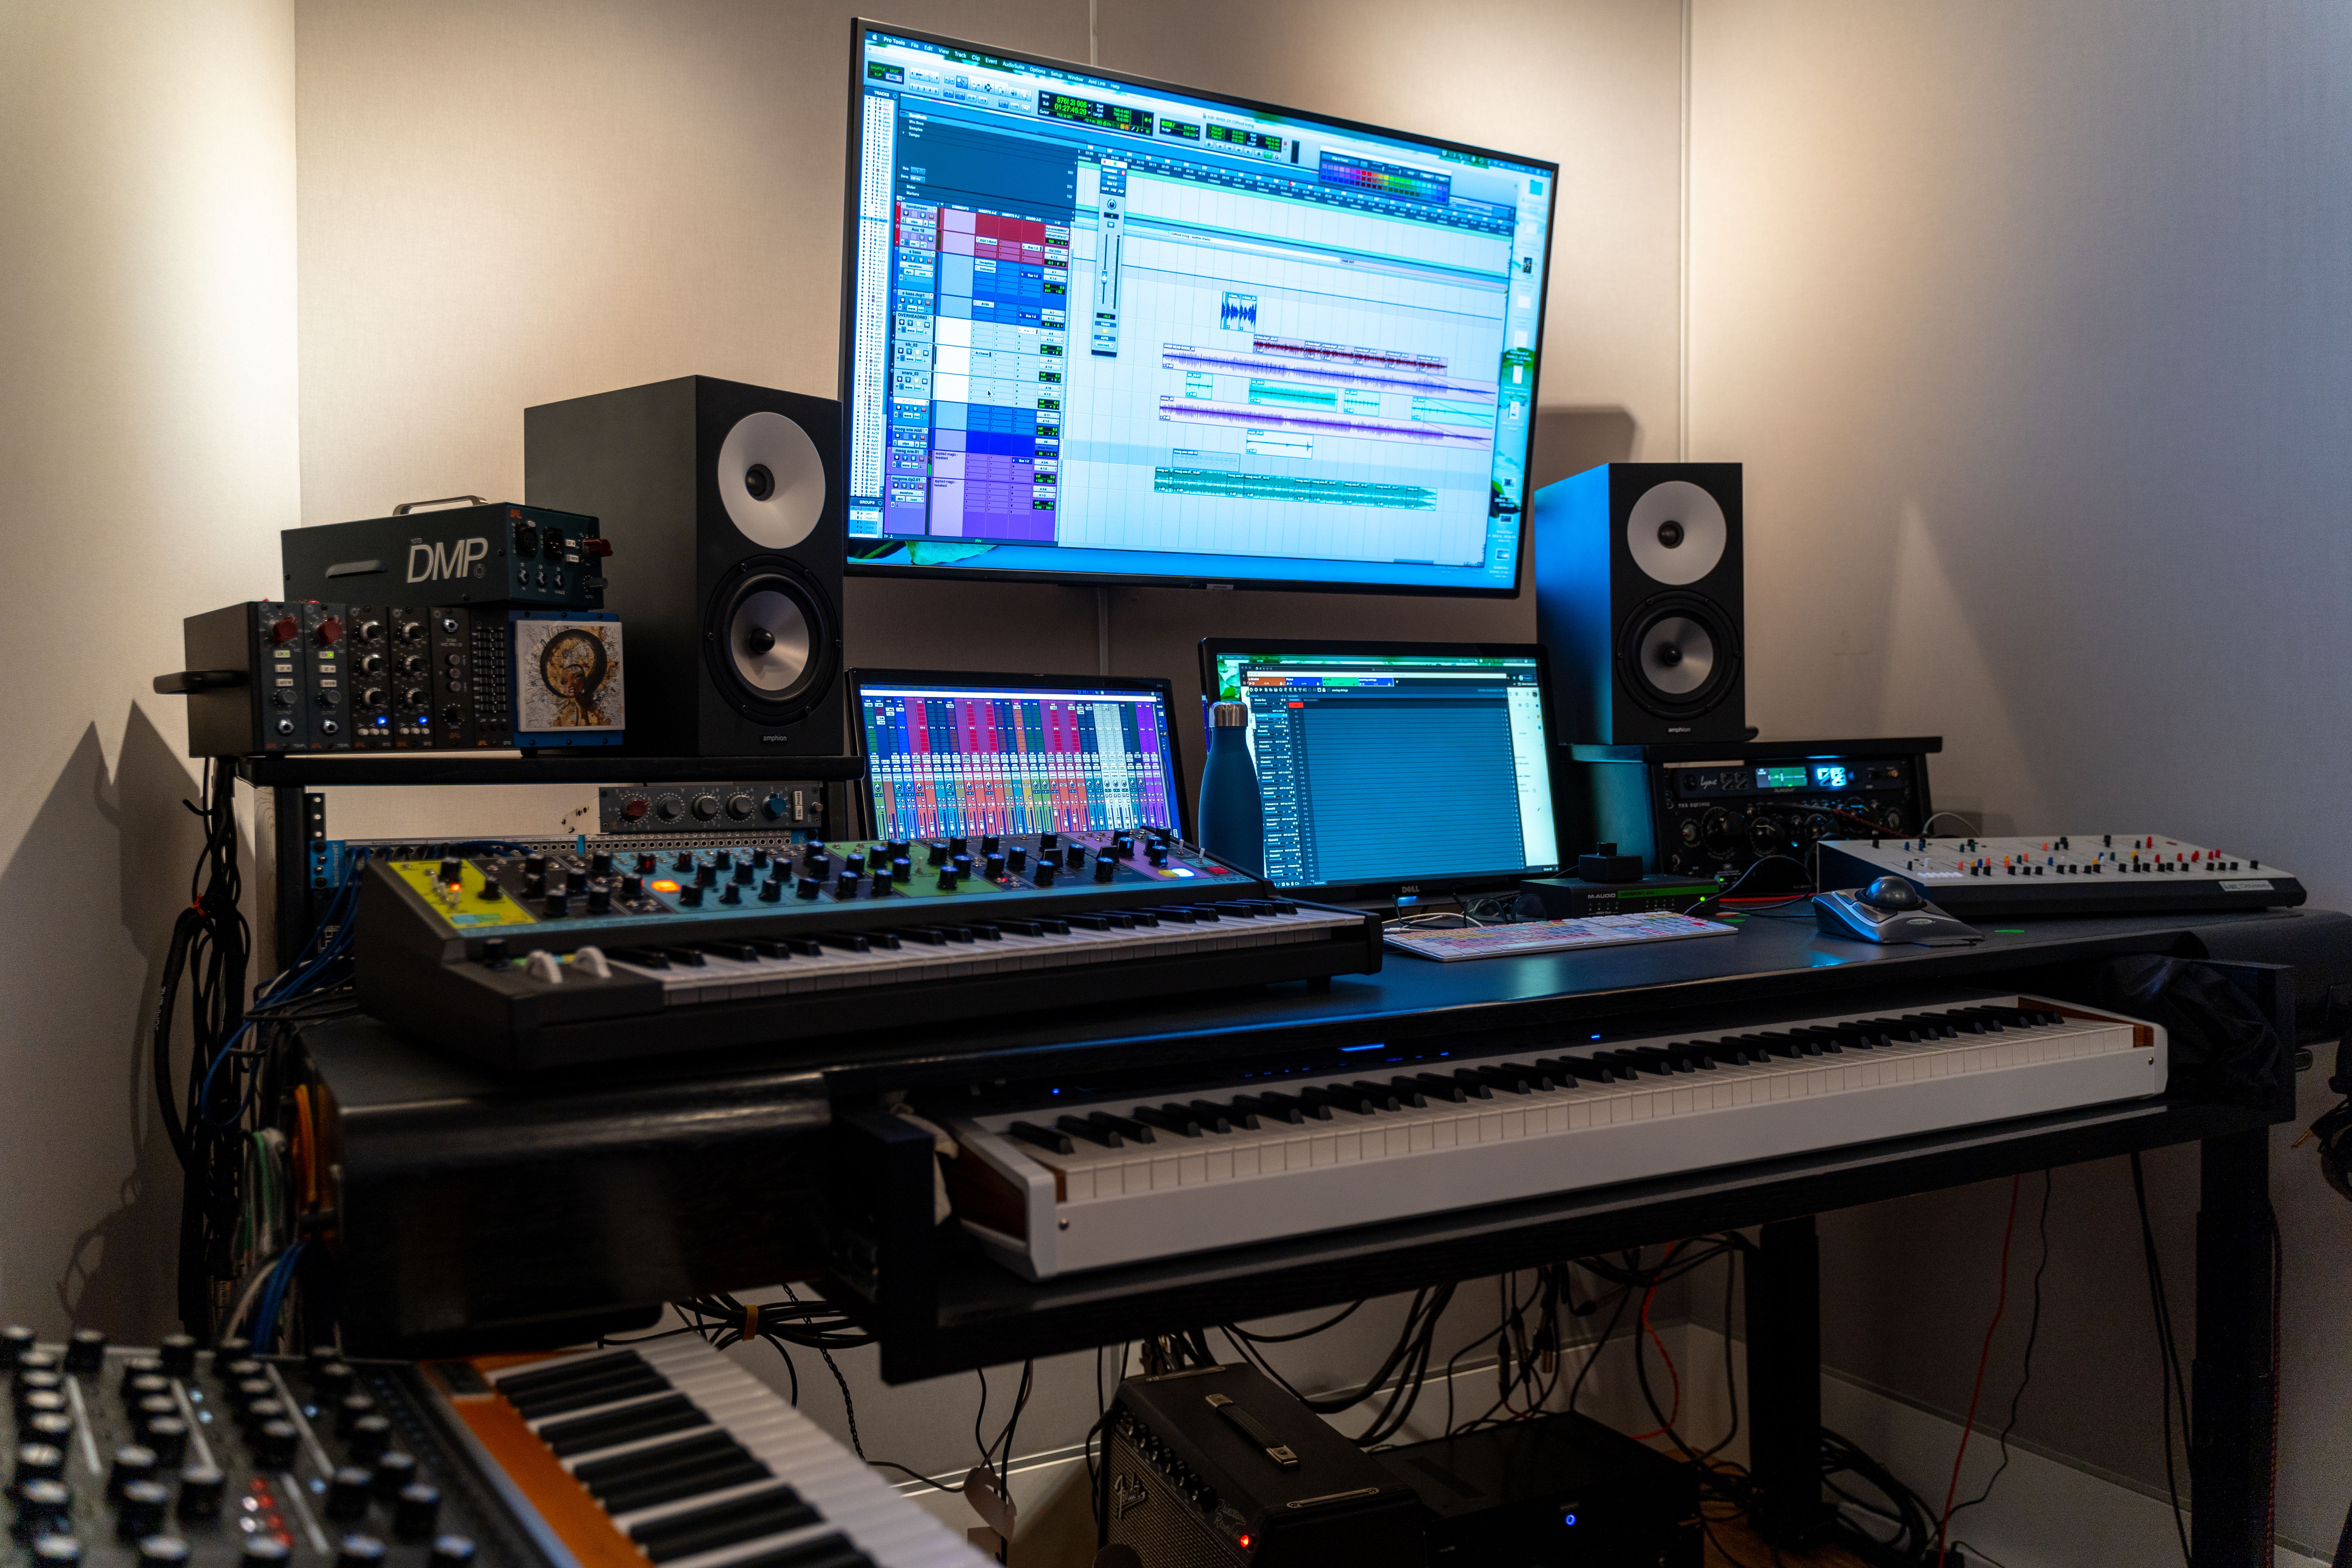 Guerra uses Amphion One18 monitors as an essential part of his composition and production signal flow.